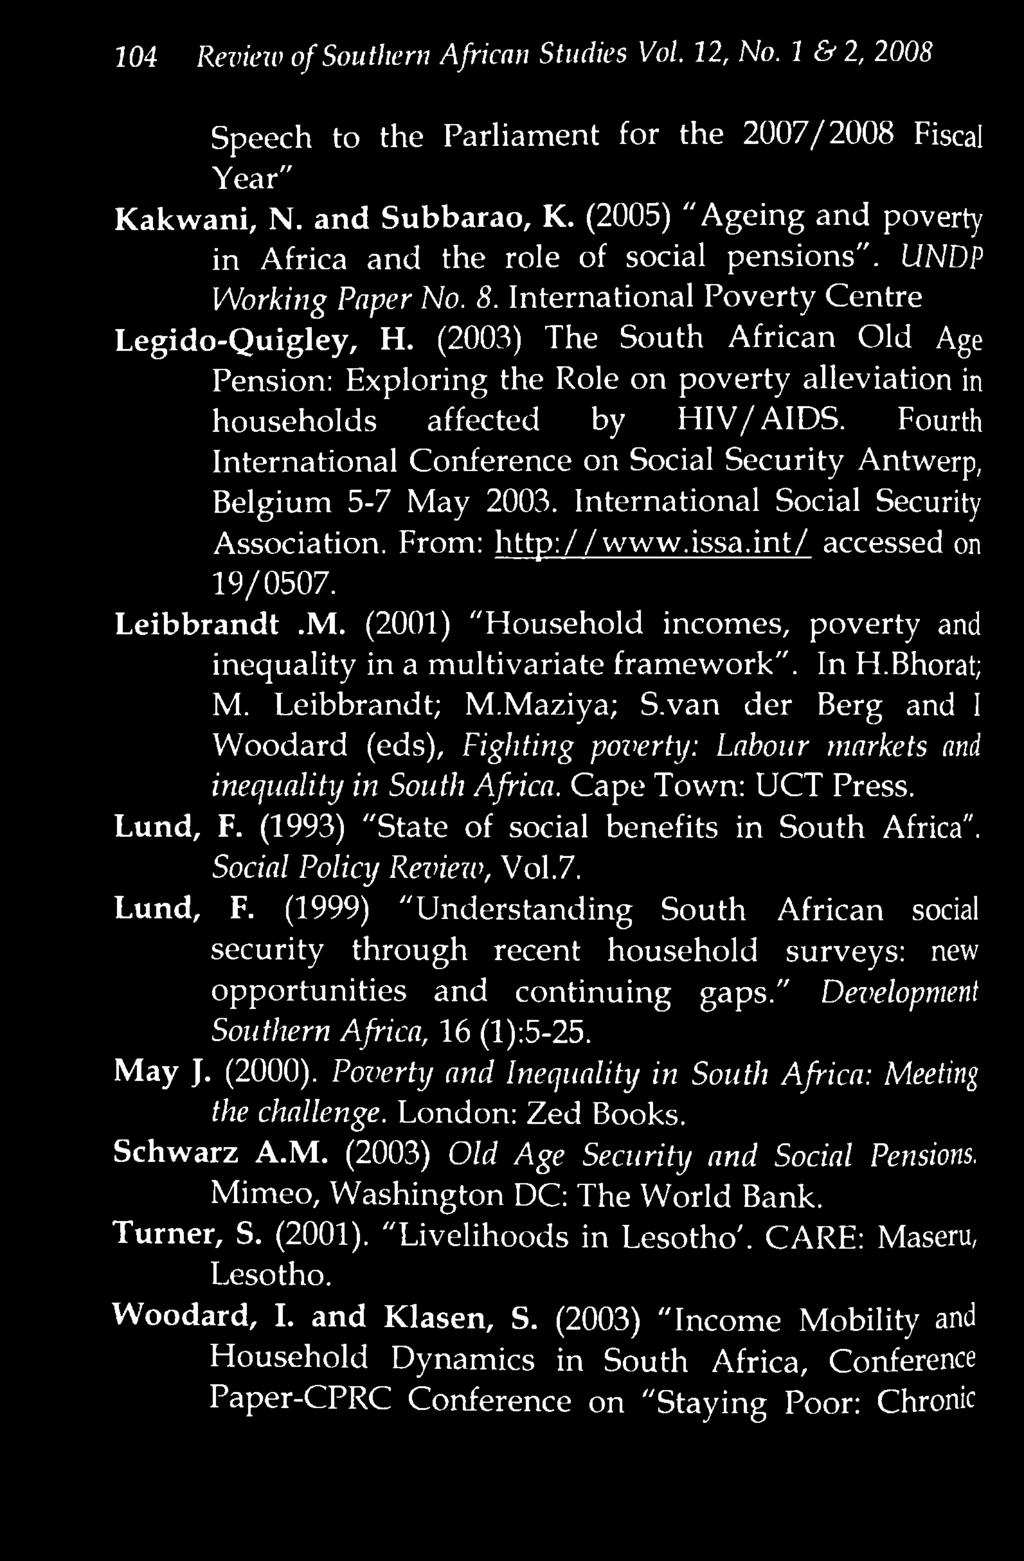 (2003) The South African Old Age Pension: Exploring the Role on poverty alleviation in households affected by HIV/AIDS.